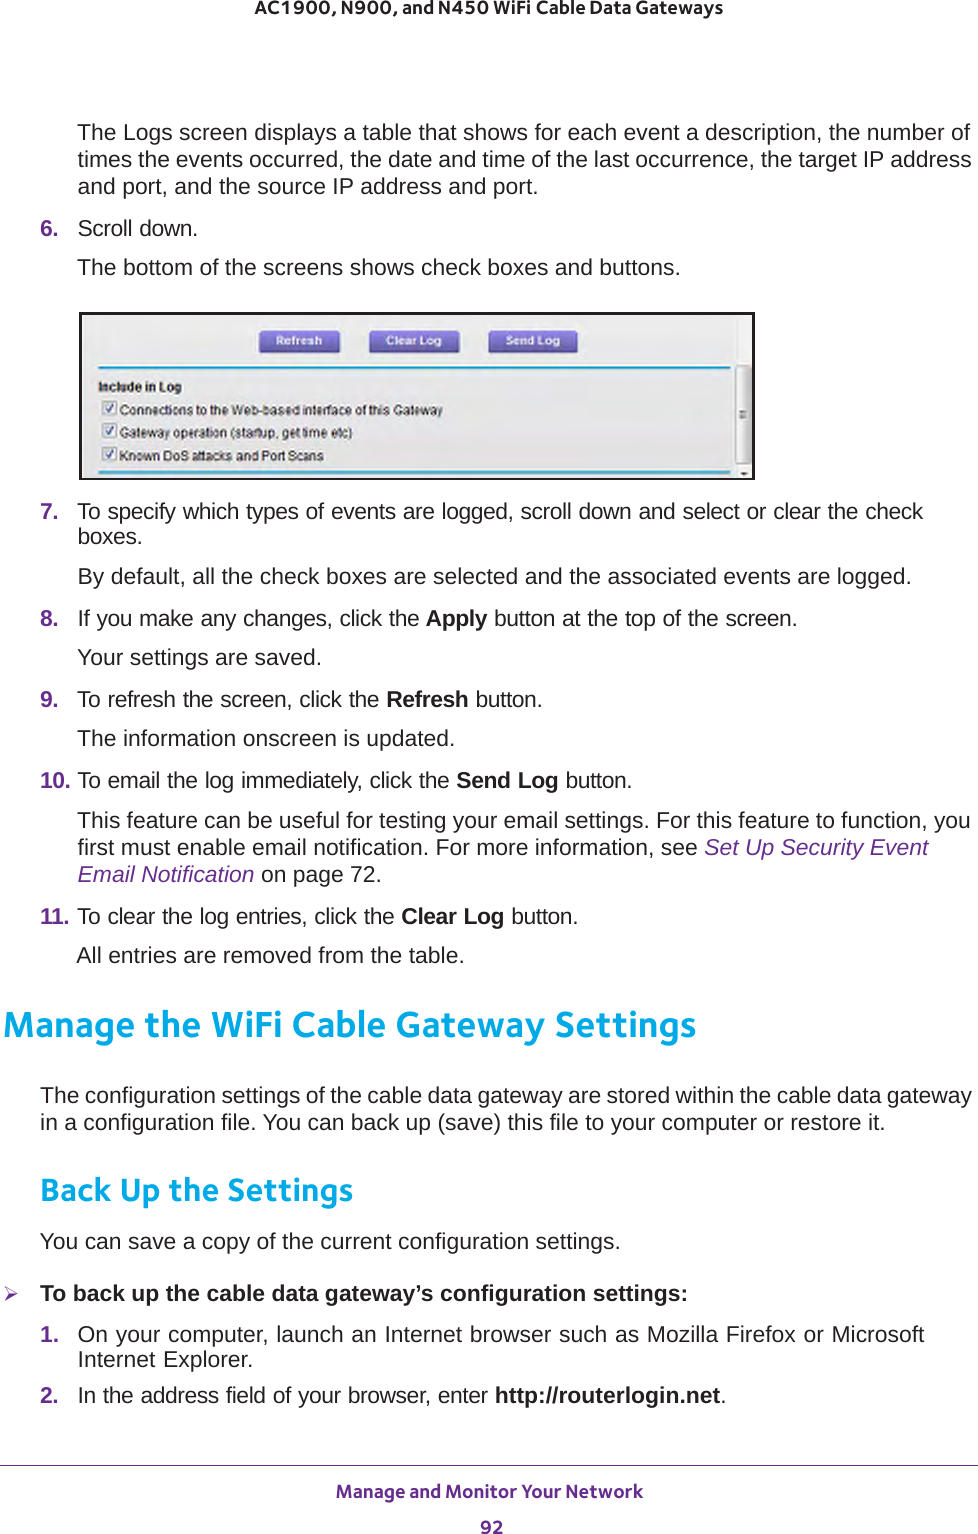 Manage and Monitor Your Network 92AC1900, N900, and N450 WiFi Cable Data Gateways The Logs screen displays a table that shows for each event a description, the number of times the events occurred, the date and time of the last occurrence, the target IP address and port, and the source IP address and port.6.  Scroll down.The bottom of the screens shows check boxes and buttons.7.  To specify which types of events are logged, scroll down and select or clear the check boxes.By default, all the check boxes are selected and the associated events are logged.8.  If you make any changes, click the Apply button at the top of the screen.Your settings are saved.9.  To refresh the screen, click the Refresh button.The information onscreen is updated.10. To email the log immediately, click the Send Log button.This feature can be useful for testing your email settings. For this feature to function, you first must enable email notification. For more information, see Set Up Security Event Email Notification on page  72.11. To clear the log entries, click the Clear Log button.All entries are removed from the table.Manage the WiFi Cable Gateway SettingsThe configuration settings of the cable data gateway are stored within the cable data gateway in a configuration file. You can back up (save) this file to your computer or restore it.Back Up the SettingsYou can save a copy of the current configuration settings.To back up the cable data gateway’s configuration settings:1.  On your computer, launch an Internet browser such as Mozilla Firefox or Microsoft Internet Explorer. 2.  In the address field of your browser, enter http://routerlogin.net.